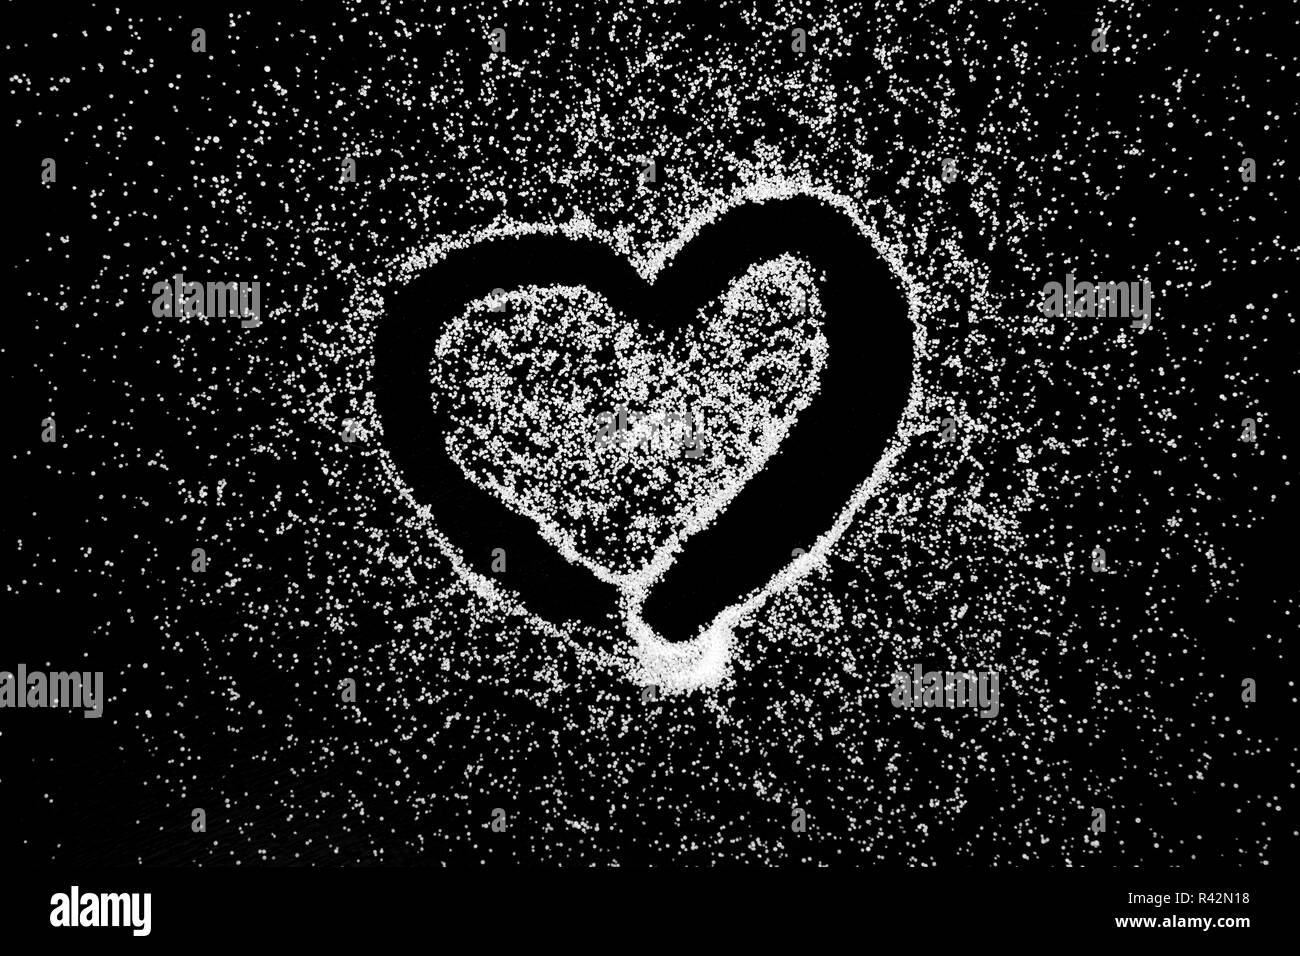 Love heart symbol drawing by finger on white salt powder on black background. Romantic St. Valentines Day holidays concept with place for text. Copy s Stock Photo